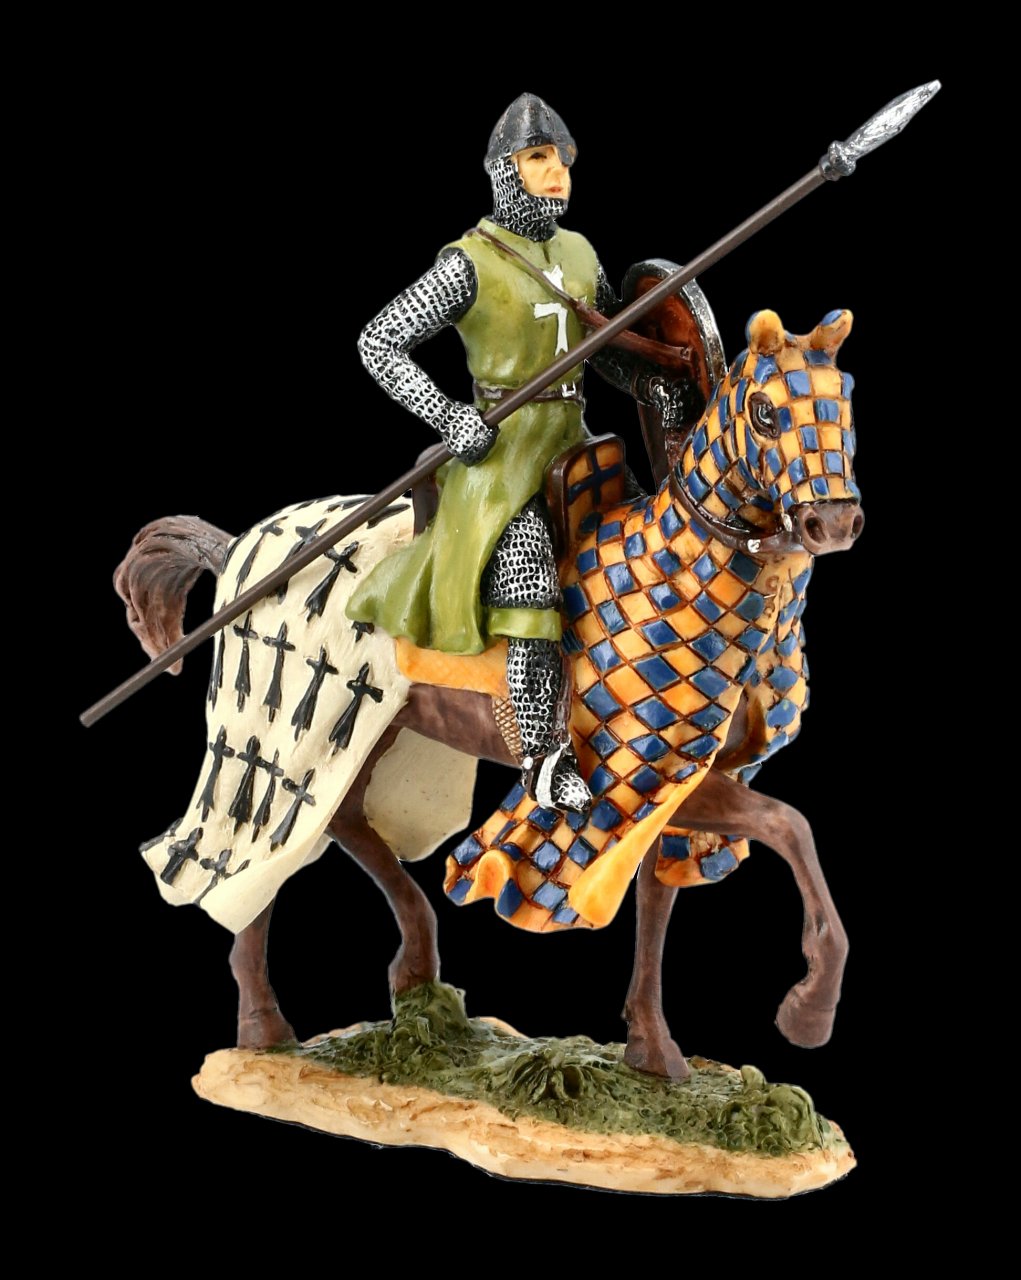 Knight Figurine on Horseback with Spear - colored